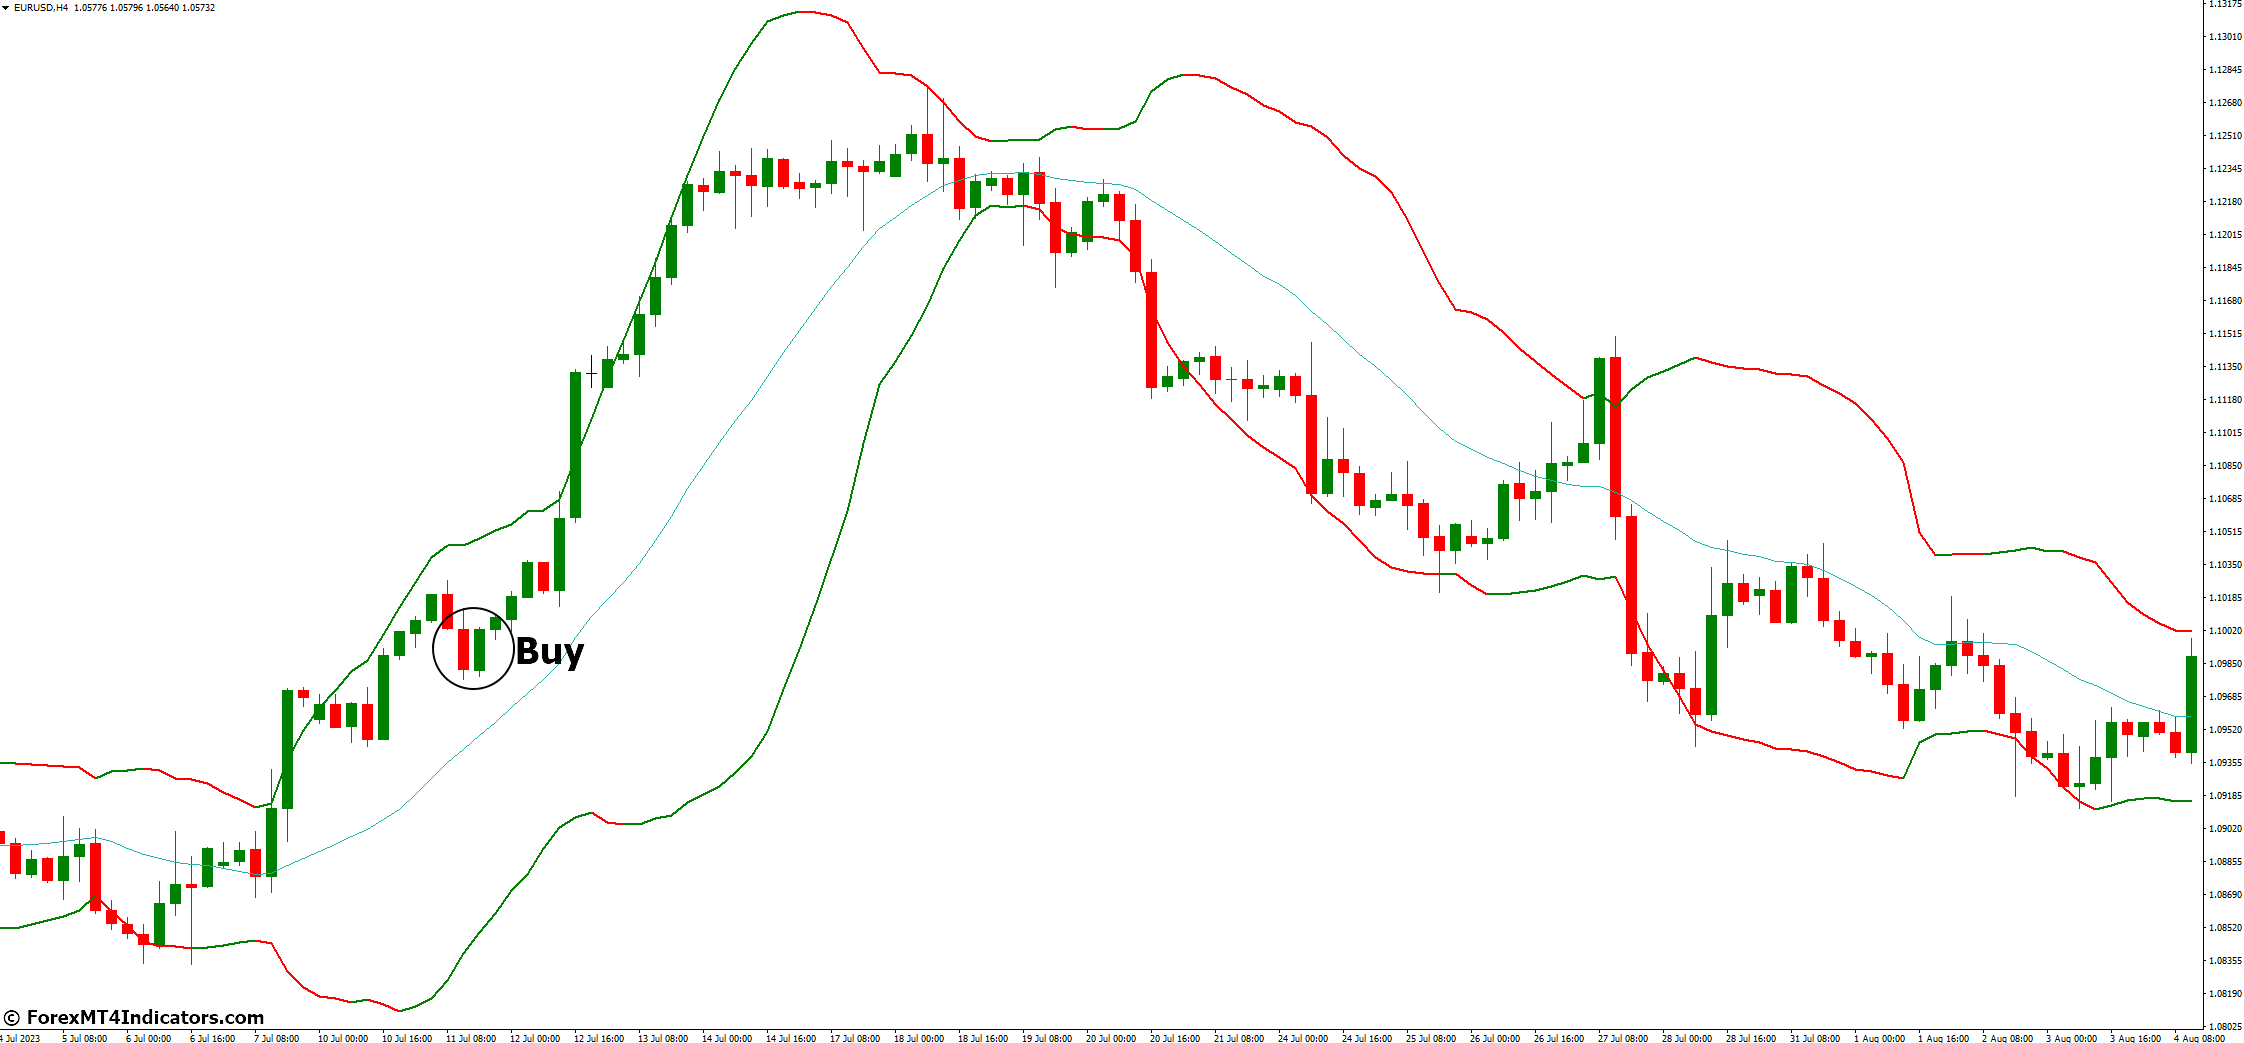 How to Trade with Bollinger Bands Bicolor MT4 Indicator - Buy Entry